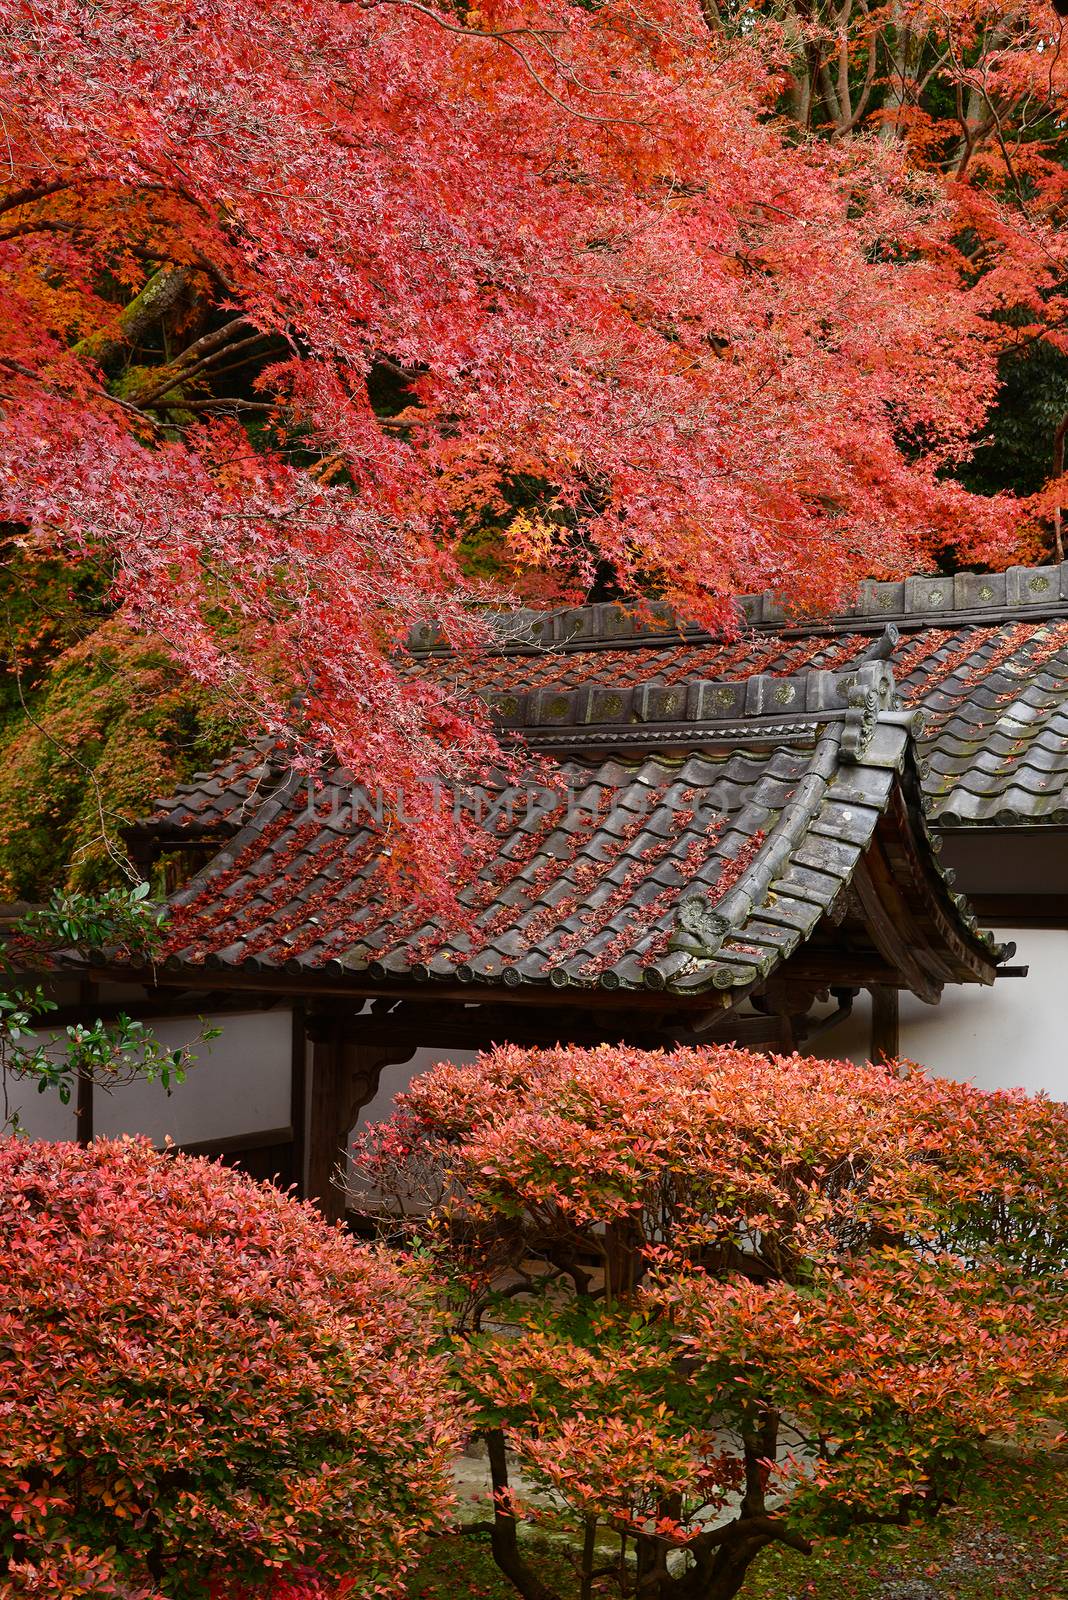 japanese style building with autumn leaves